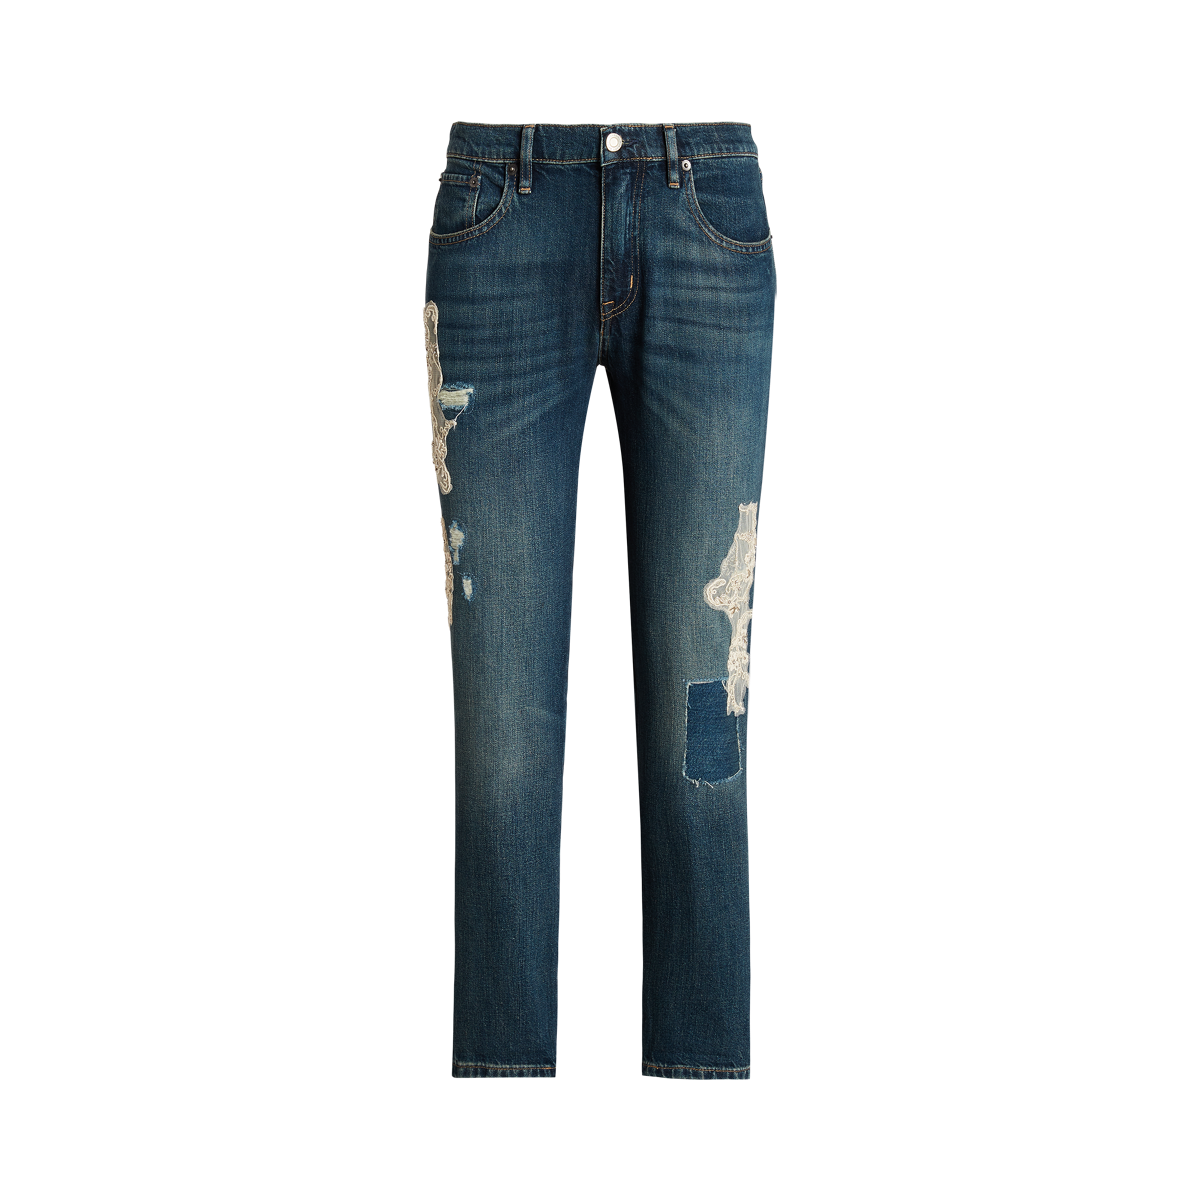 Lace Patchwork Relaxed Tapered Jean